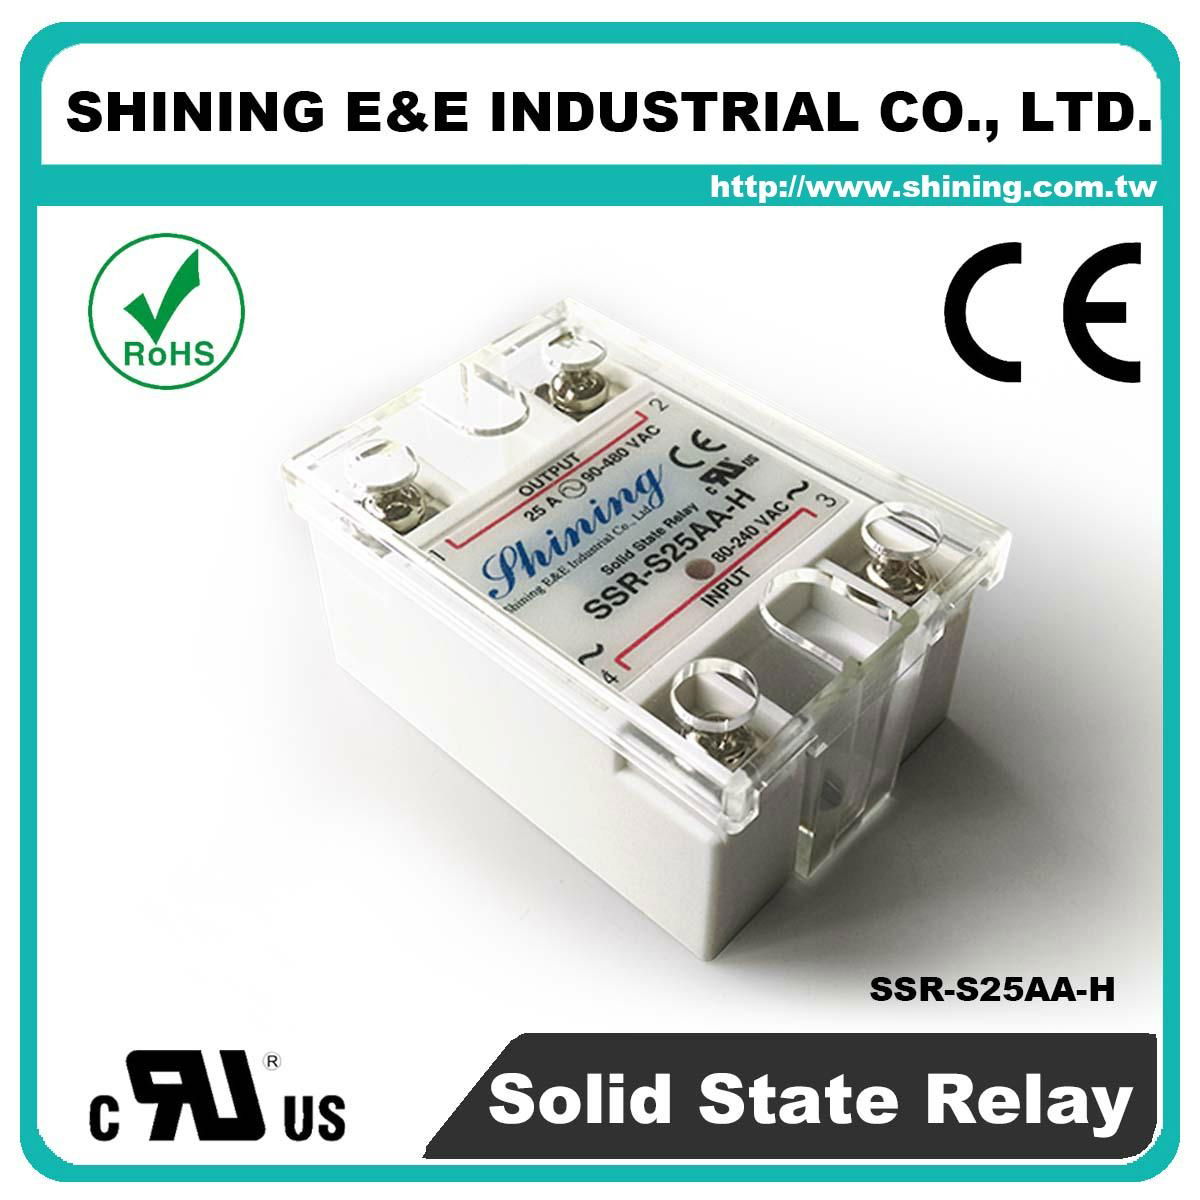 SSR-S25AA-H Single Phase 25Amp AC to AC Solid State Relay ( SSR ) 5